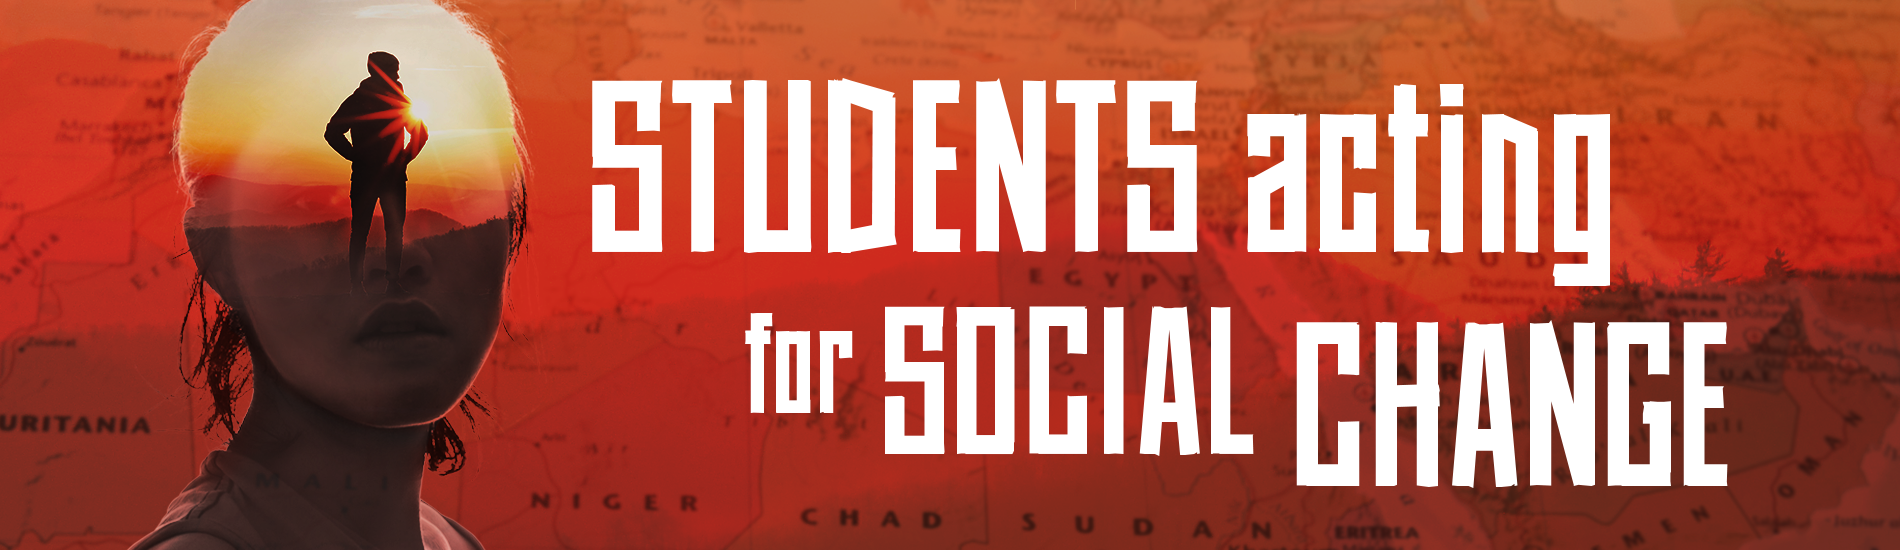 Students acting for social change